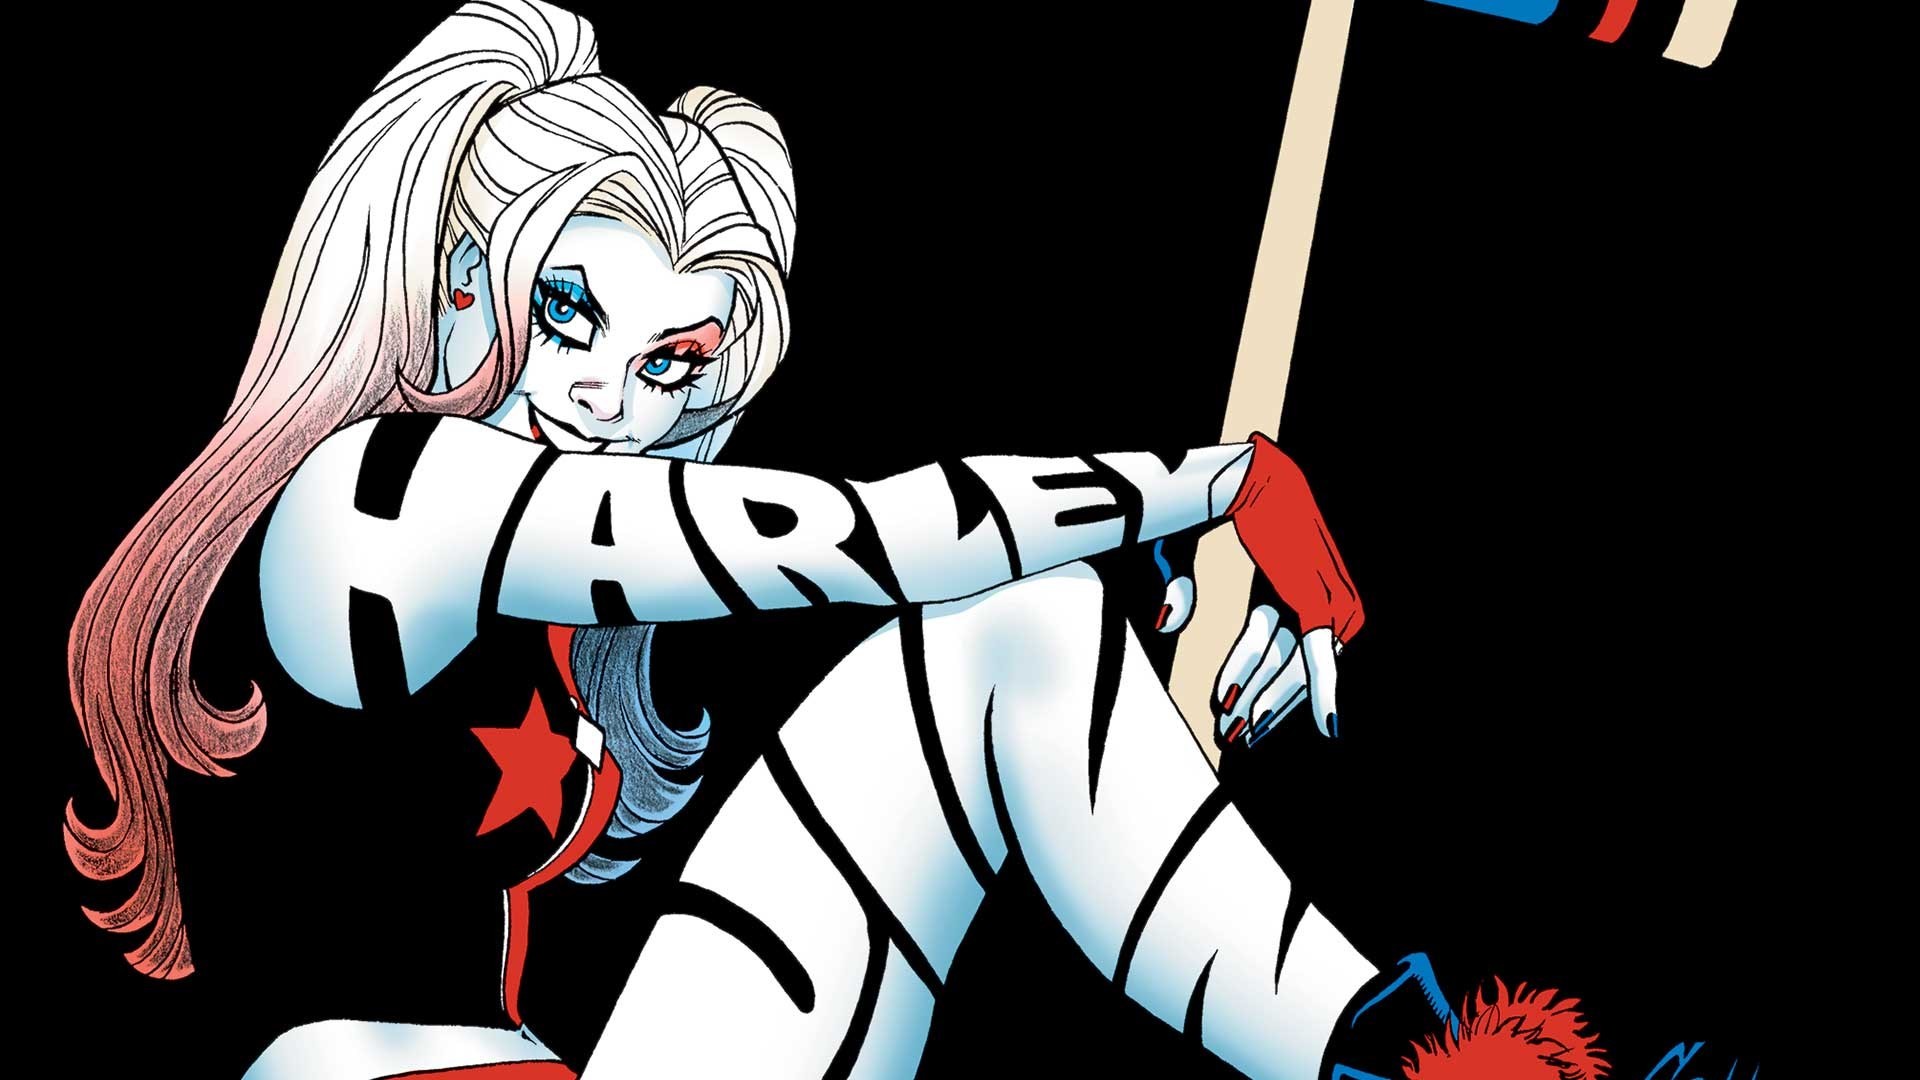  Harley  Quinn  background   Download free awesome HD 